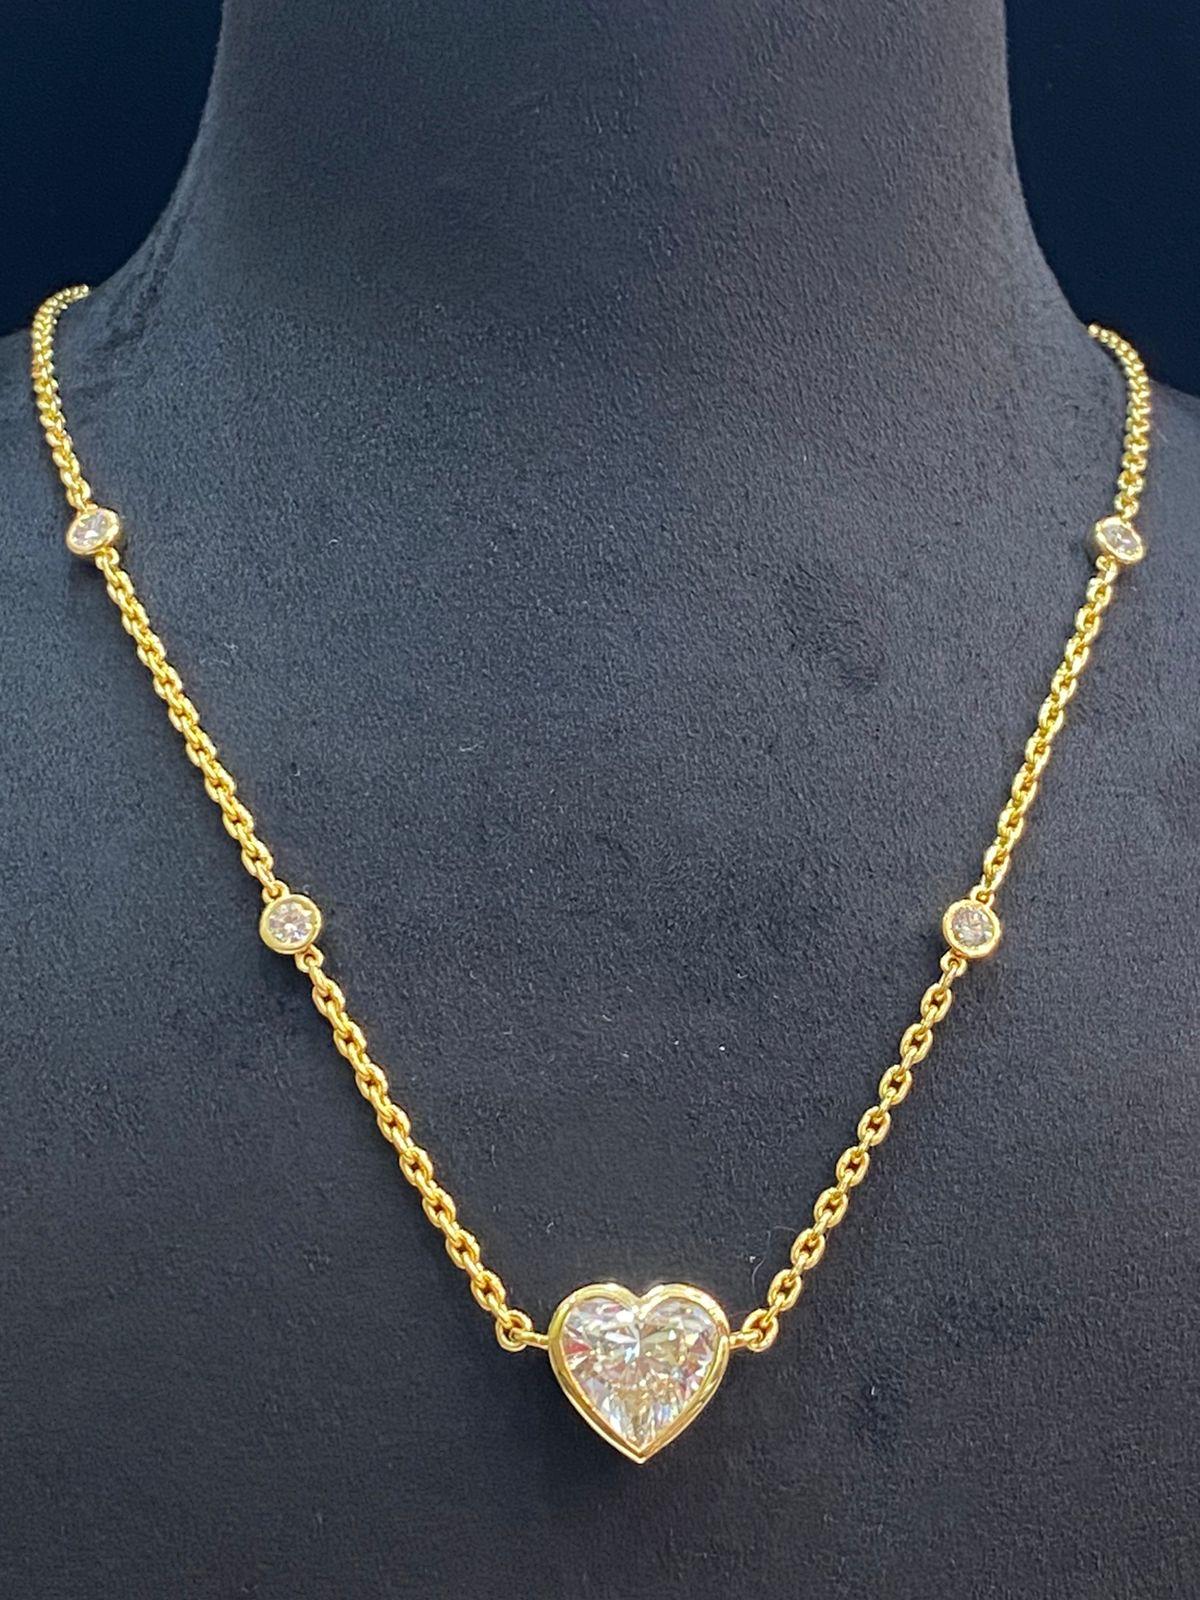 IGI Certified 7.50 Ct Heart Diamond 18K Gold Necklace  In New Condition For Sale In Massafra, IT